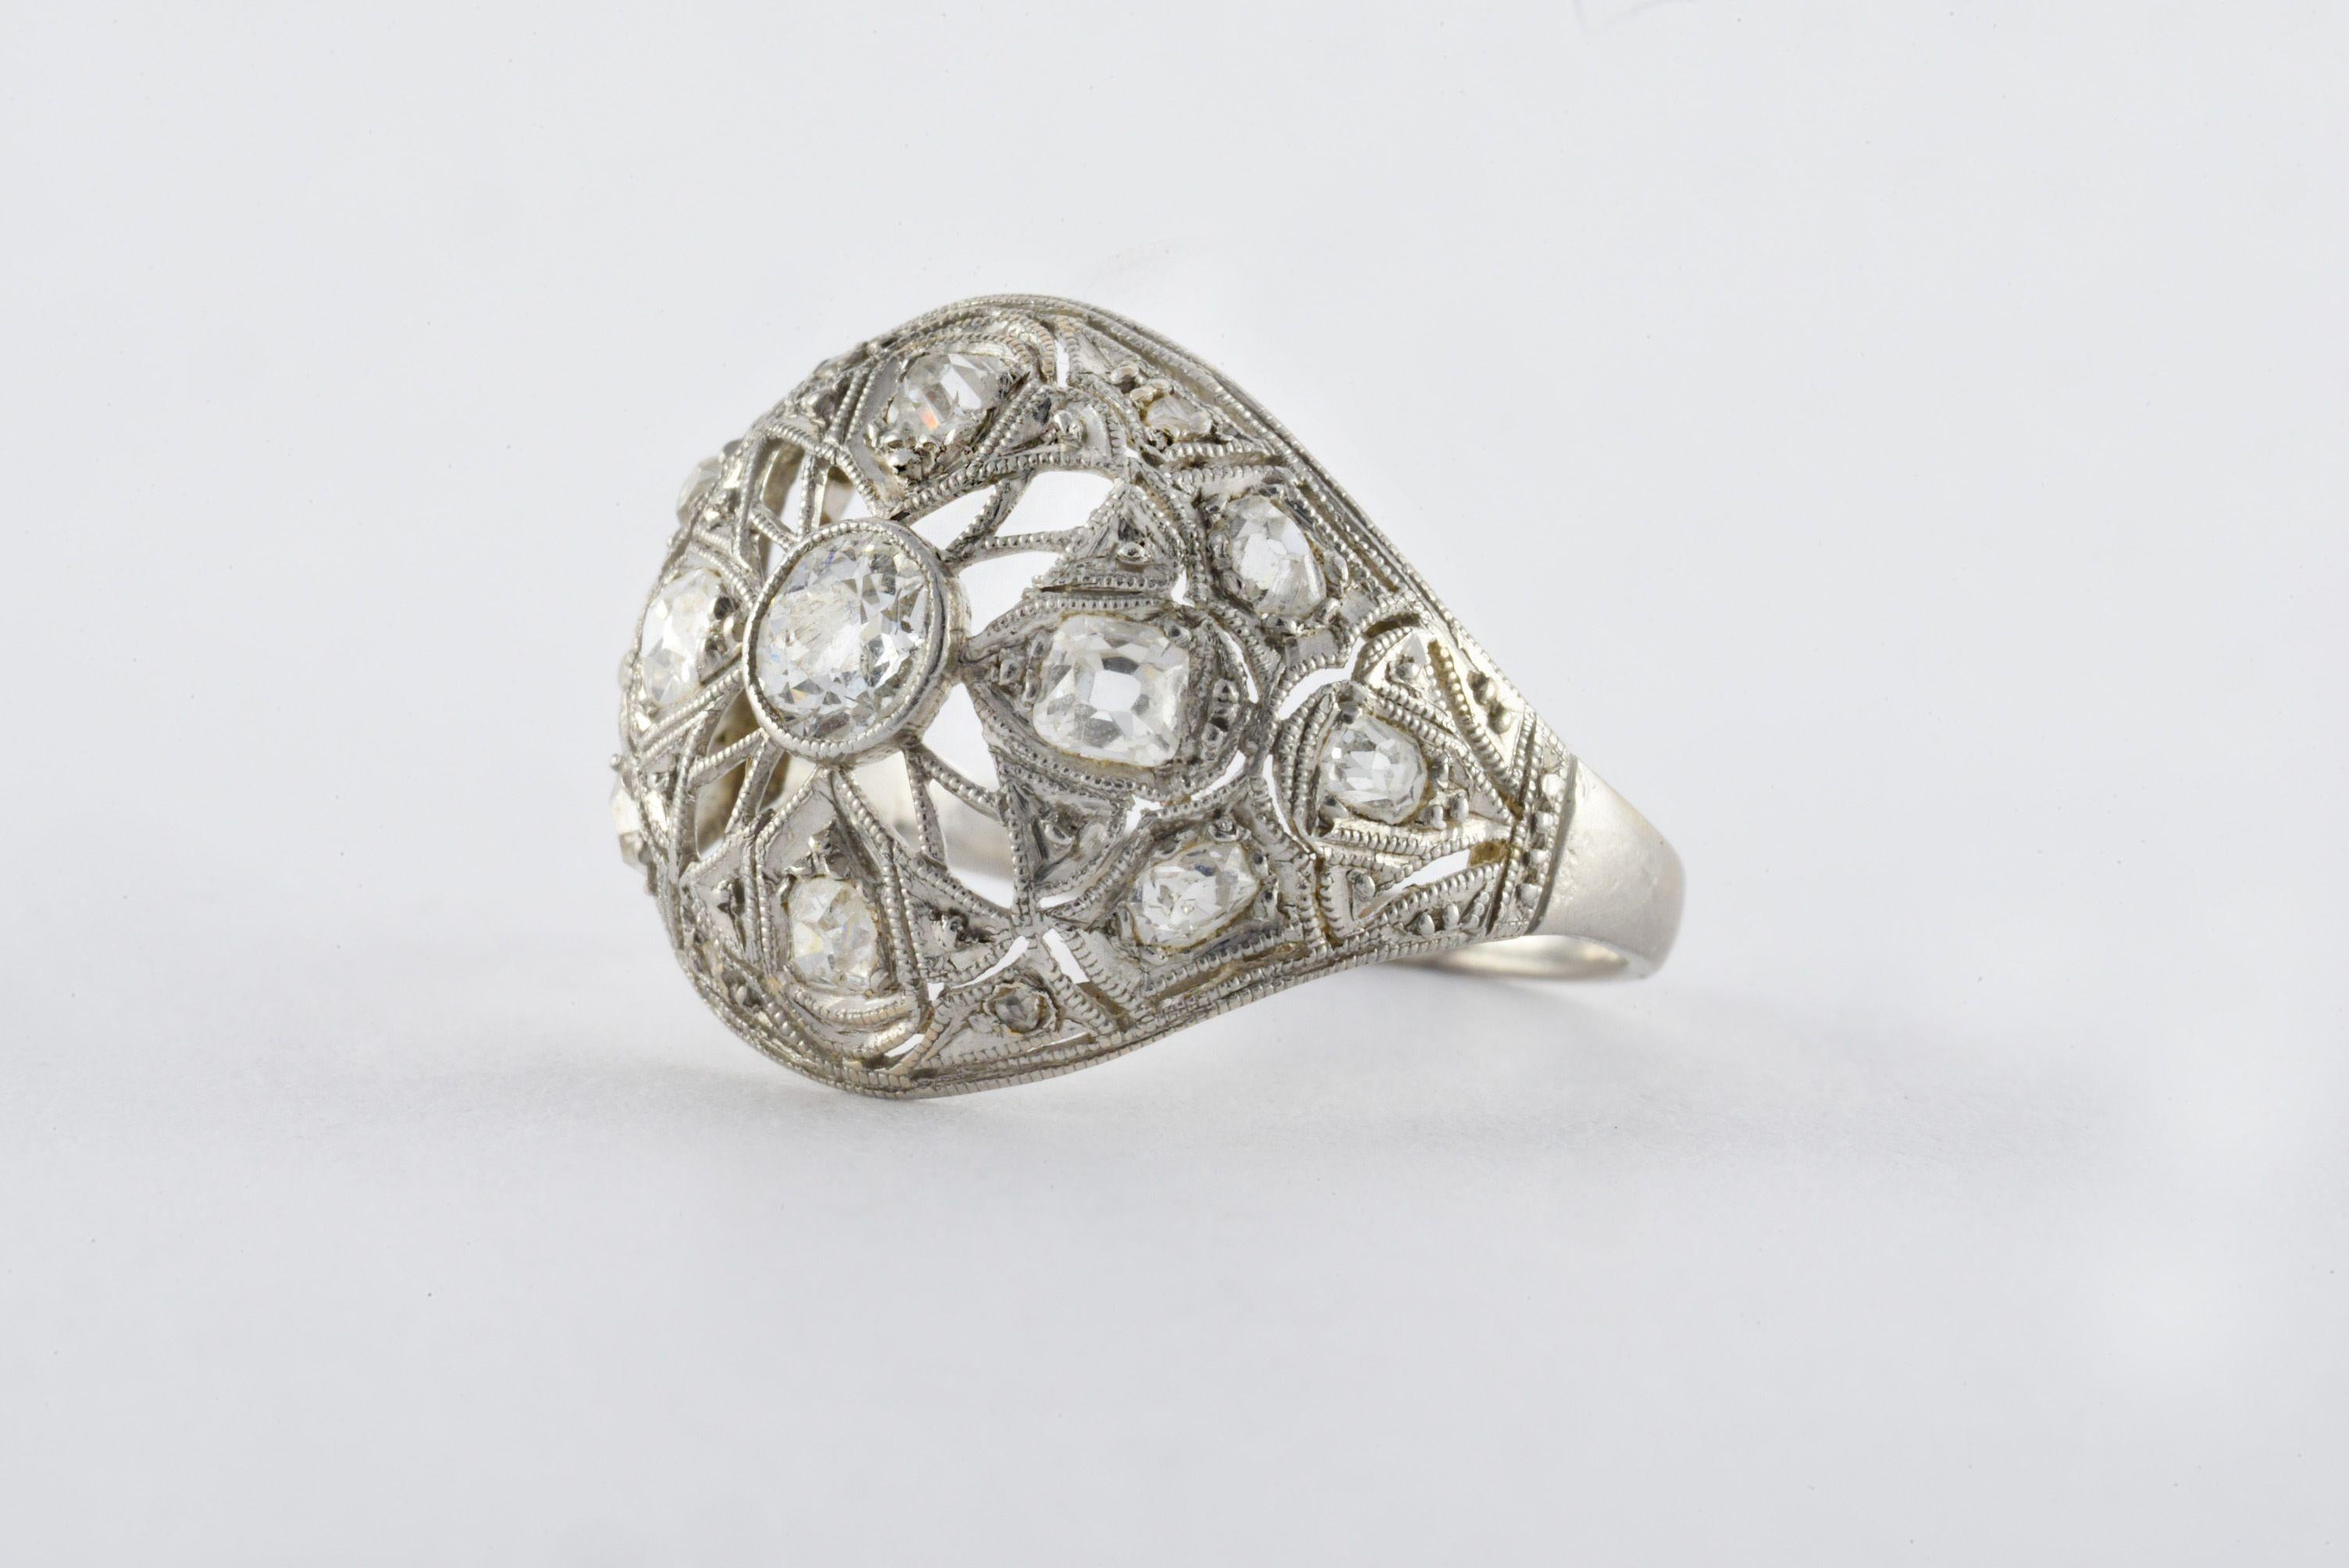 Crafted from platinum, this early Art Deco era ring sparkles in an openwork design with four Old Mine cut diamonds surrounding a larger Old European cut diamond center stone measuring approximately 0.30 carats. The decoratively pierced dome is